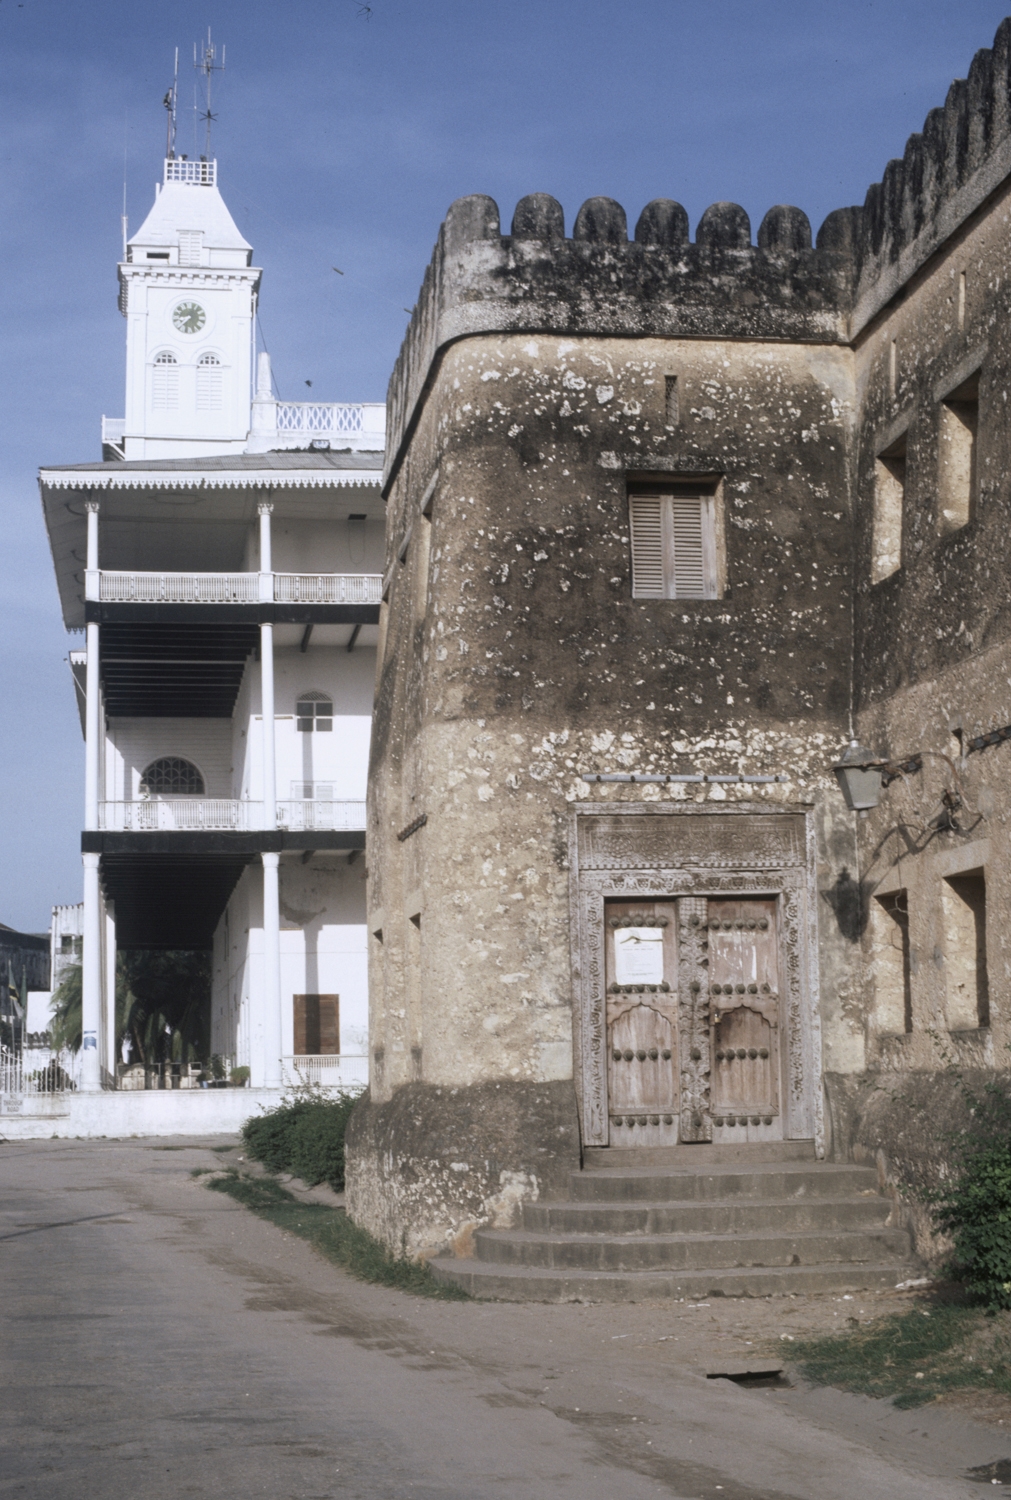 Front veranda of the palace (at left) from the south, with Old Fort tower in the foreground